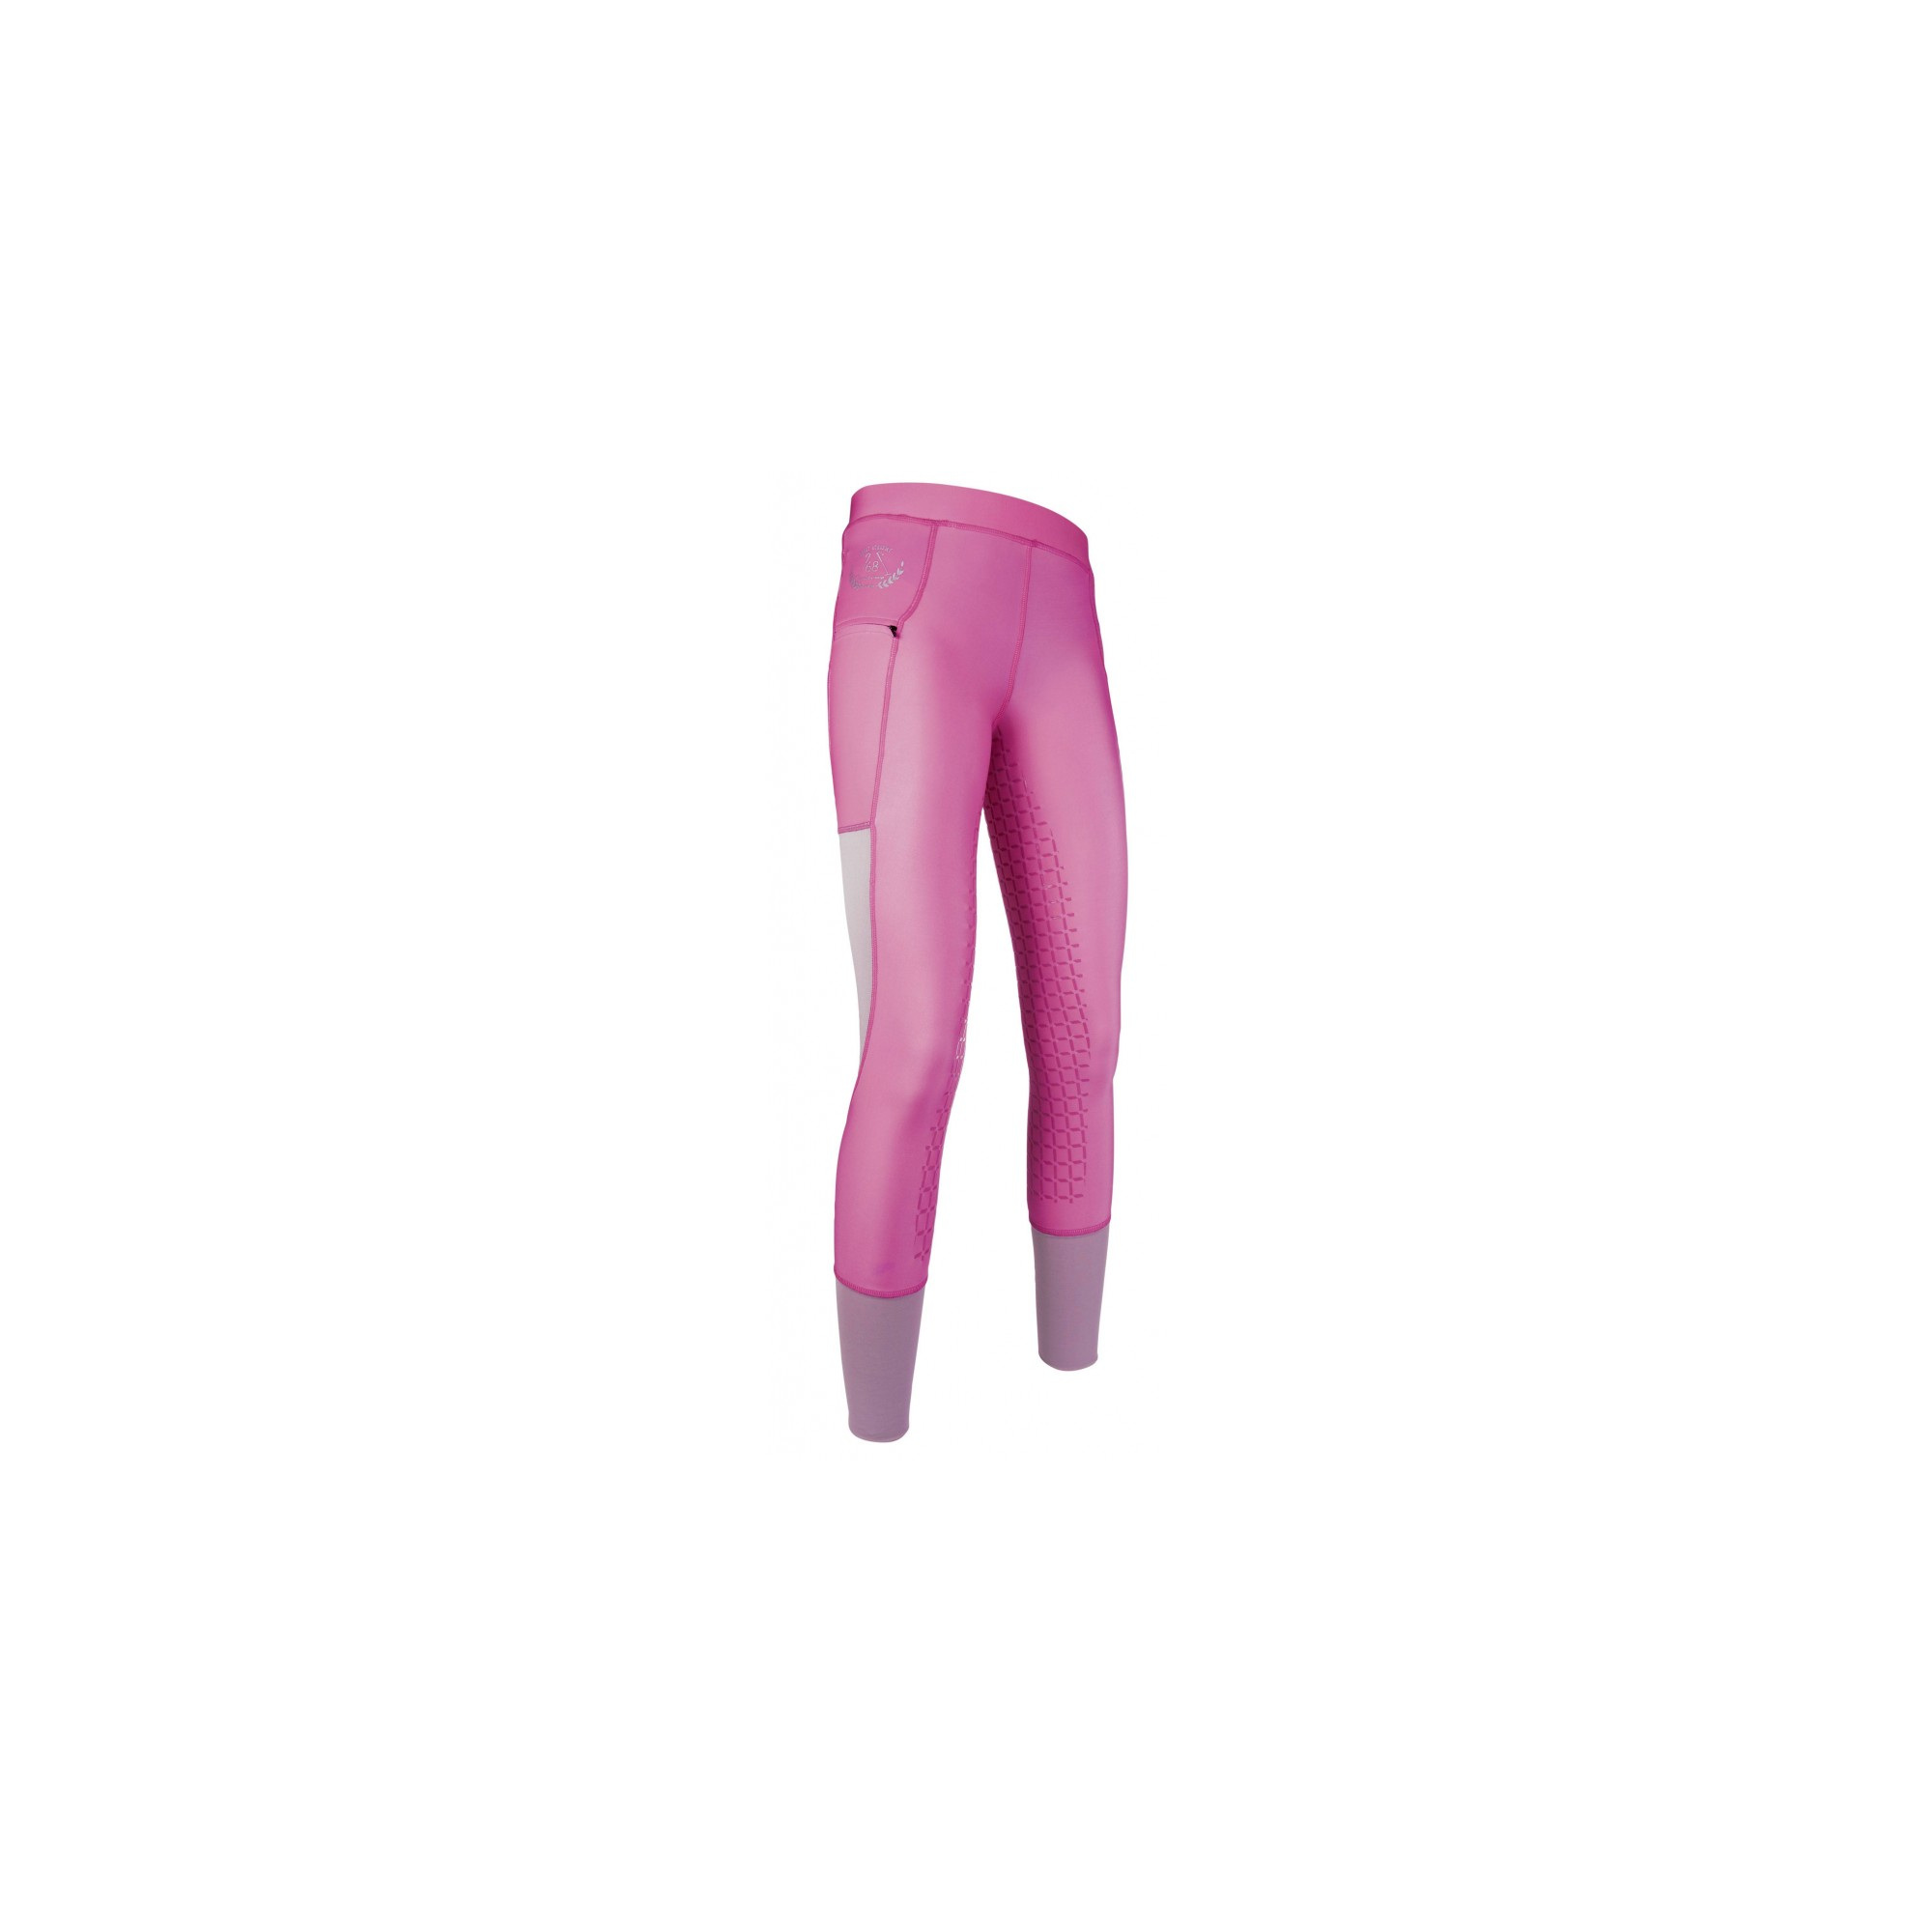 Riding Leggings Mesh with Full Silicone Seat